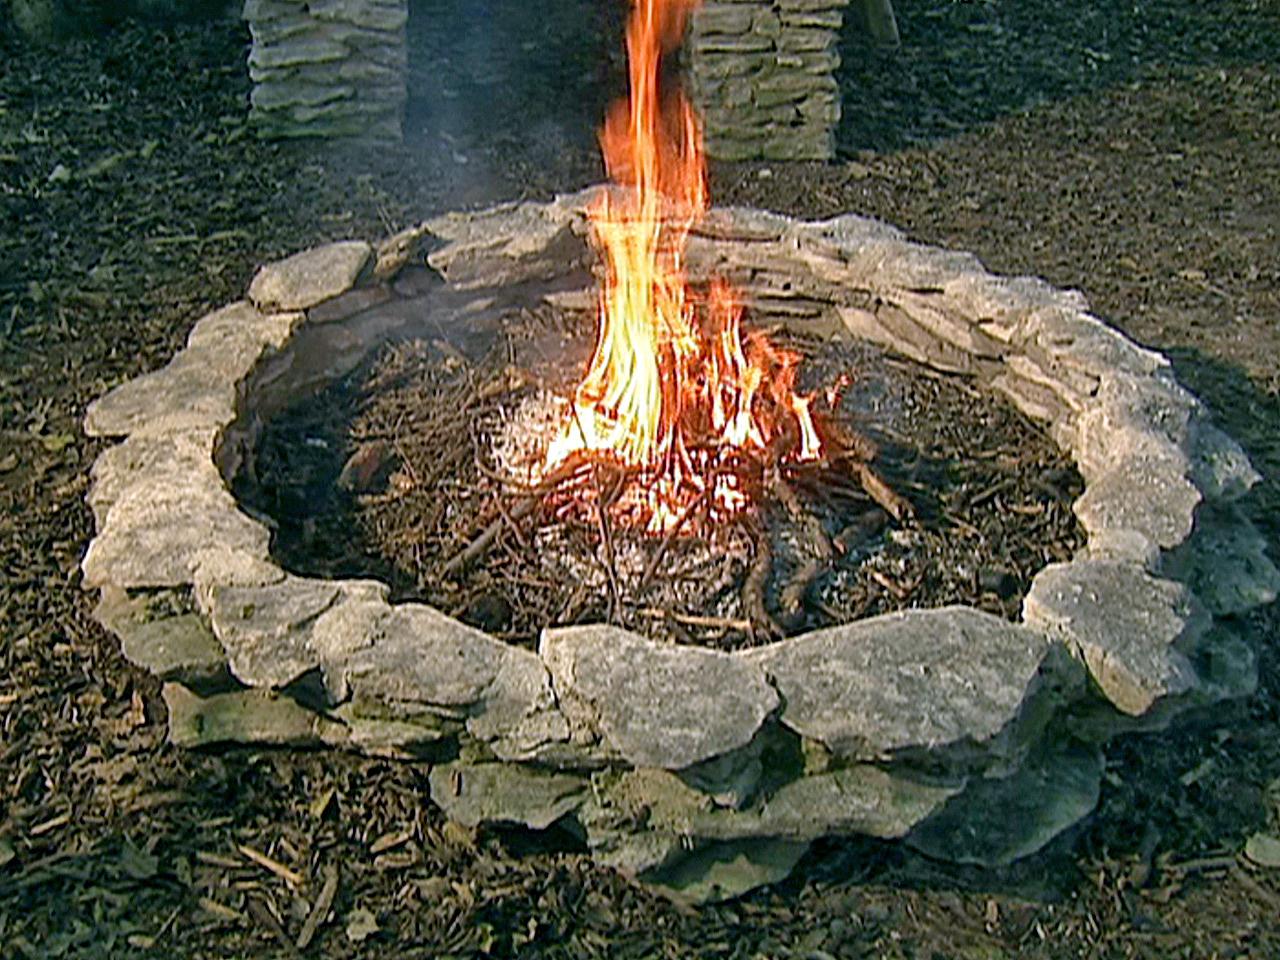 Outdoor Fire Pits And Pit Safety, What Not To Burn In A Fire Pit